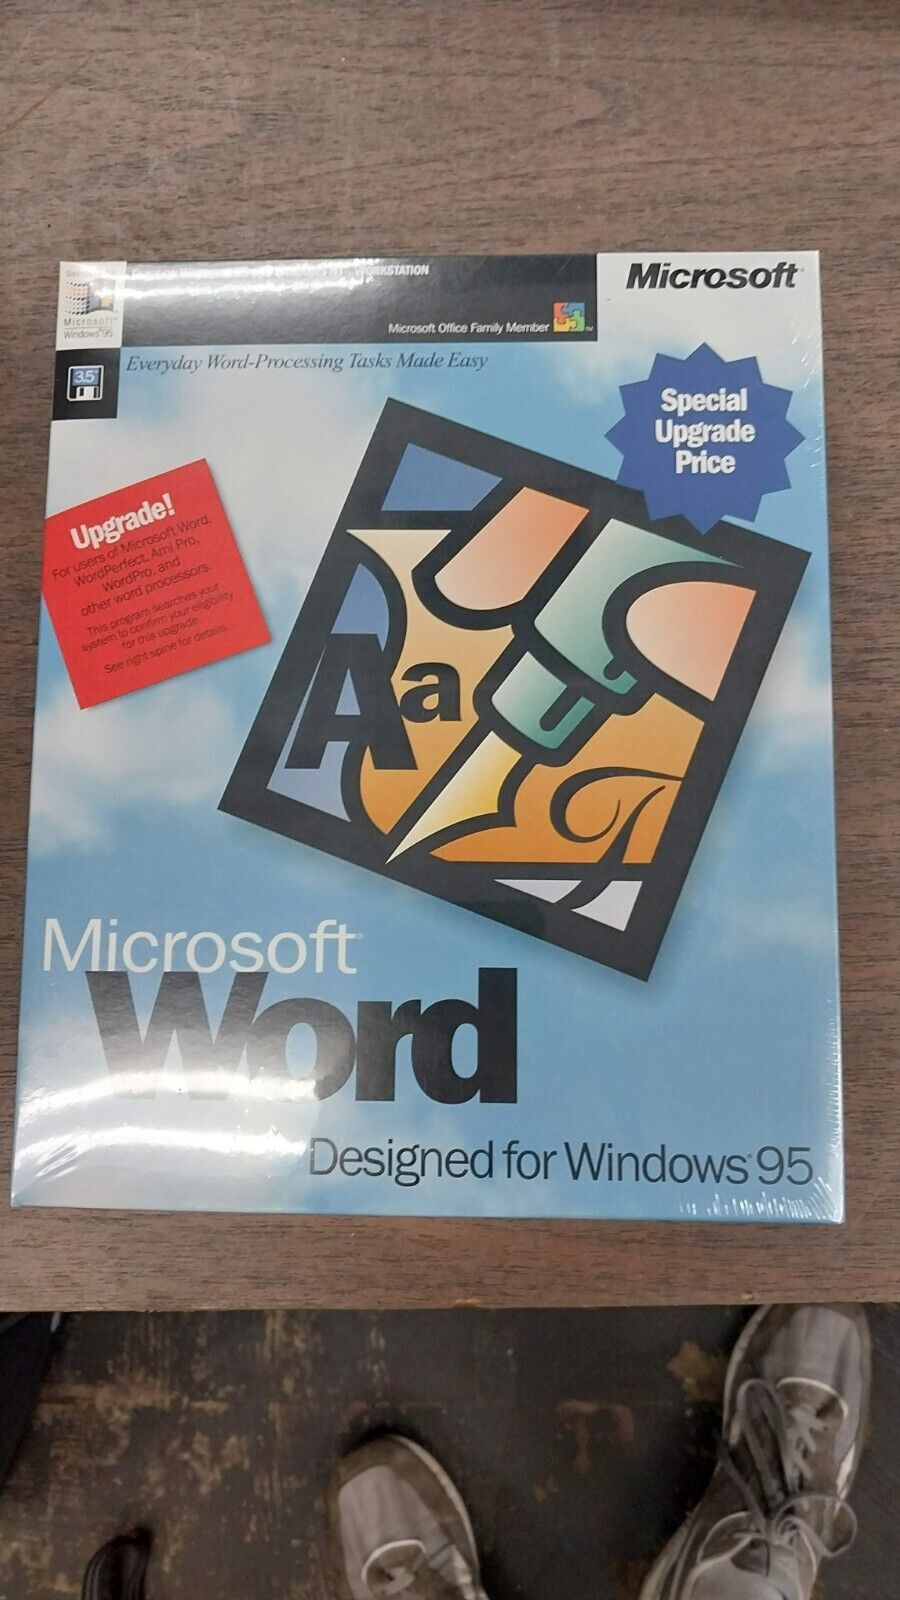 Microsoft Word Version 7.0 Boxed software, in plastic wrap